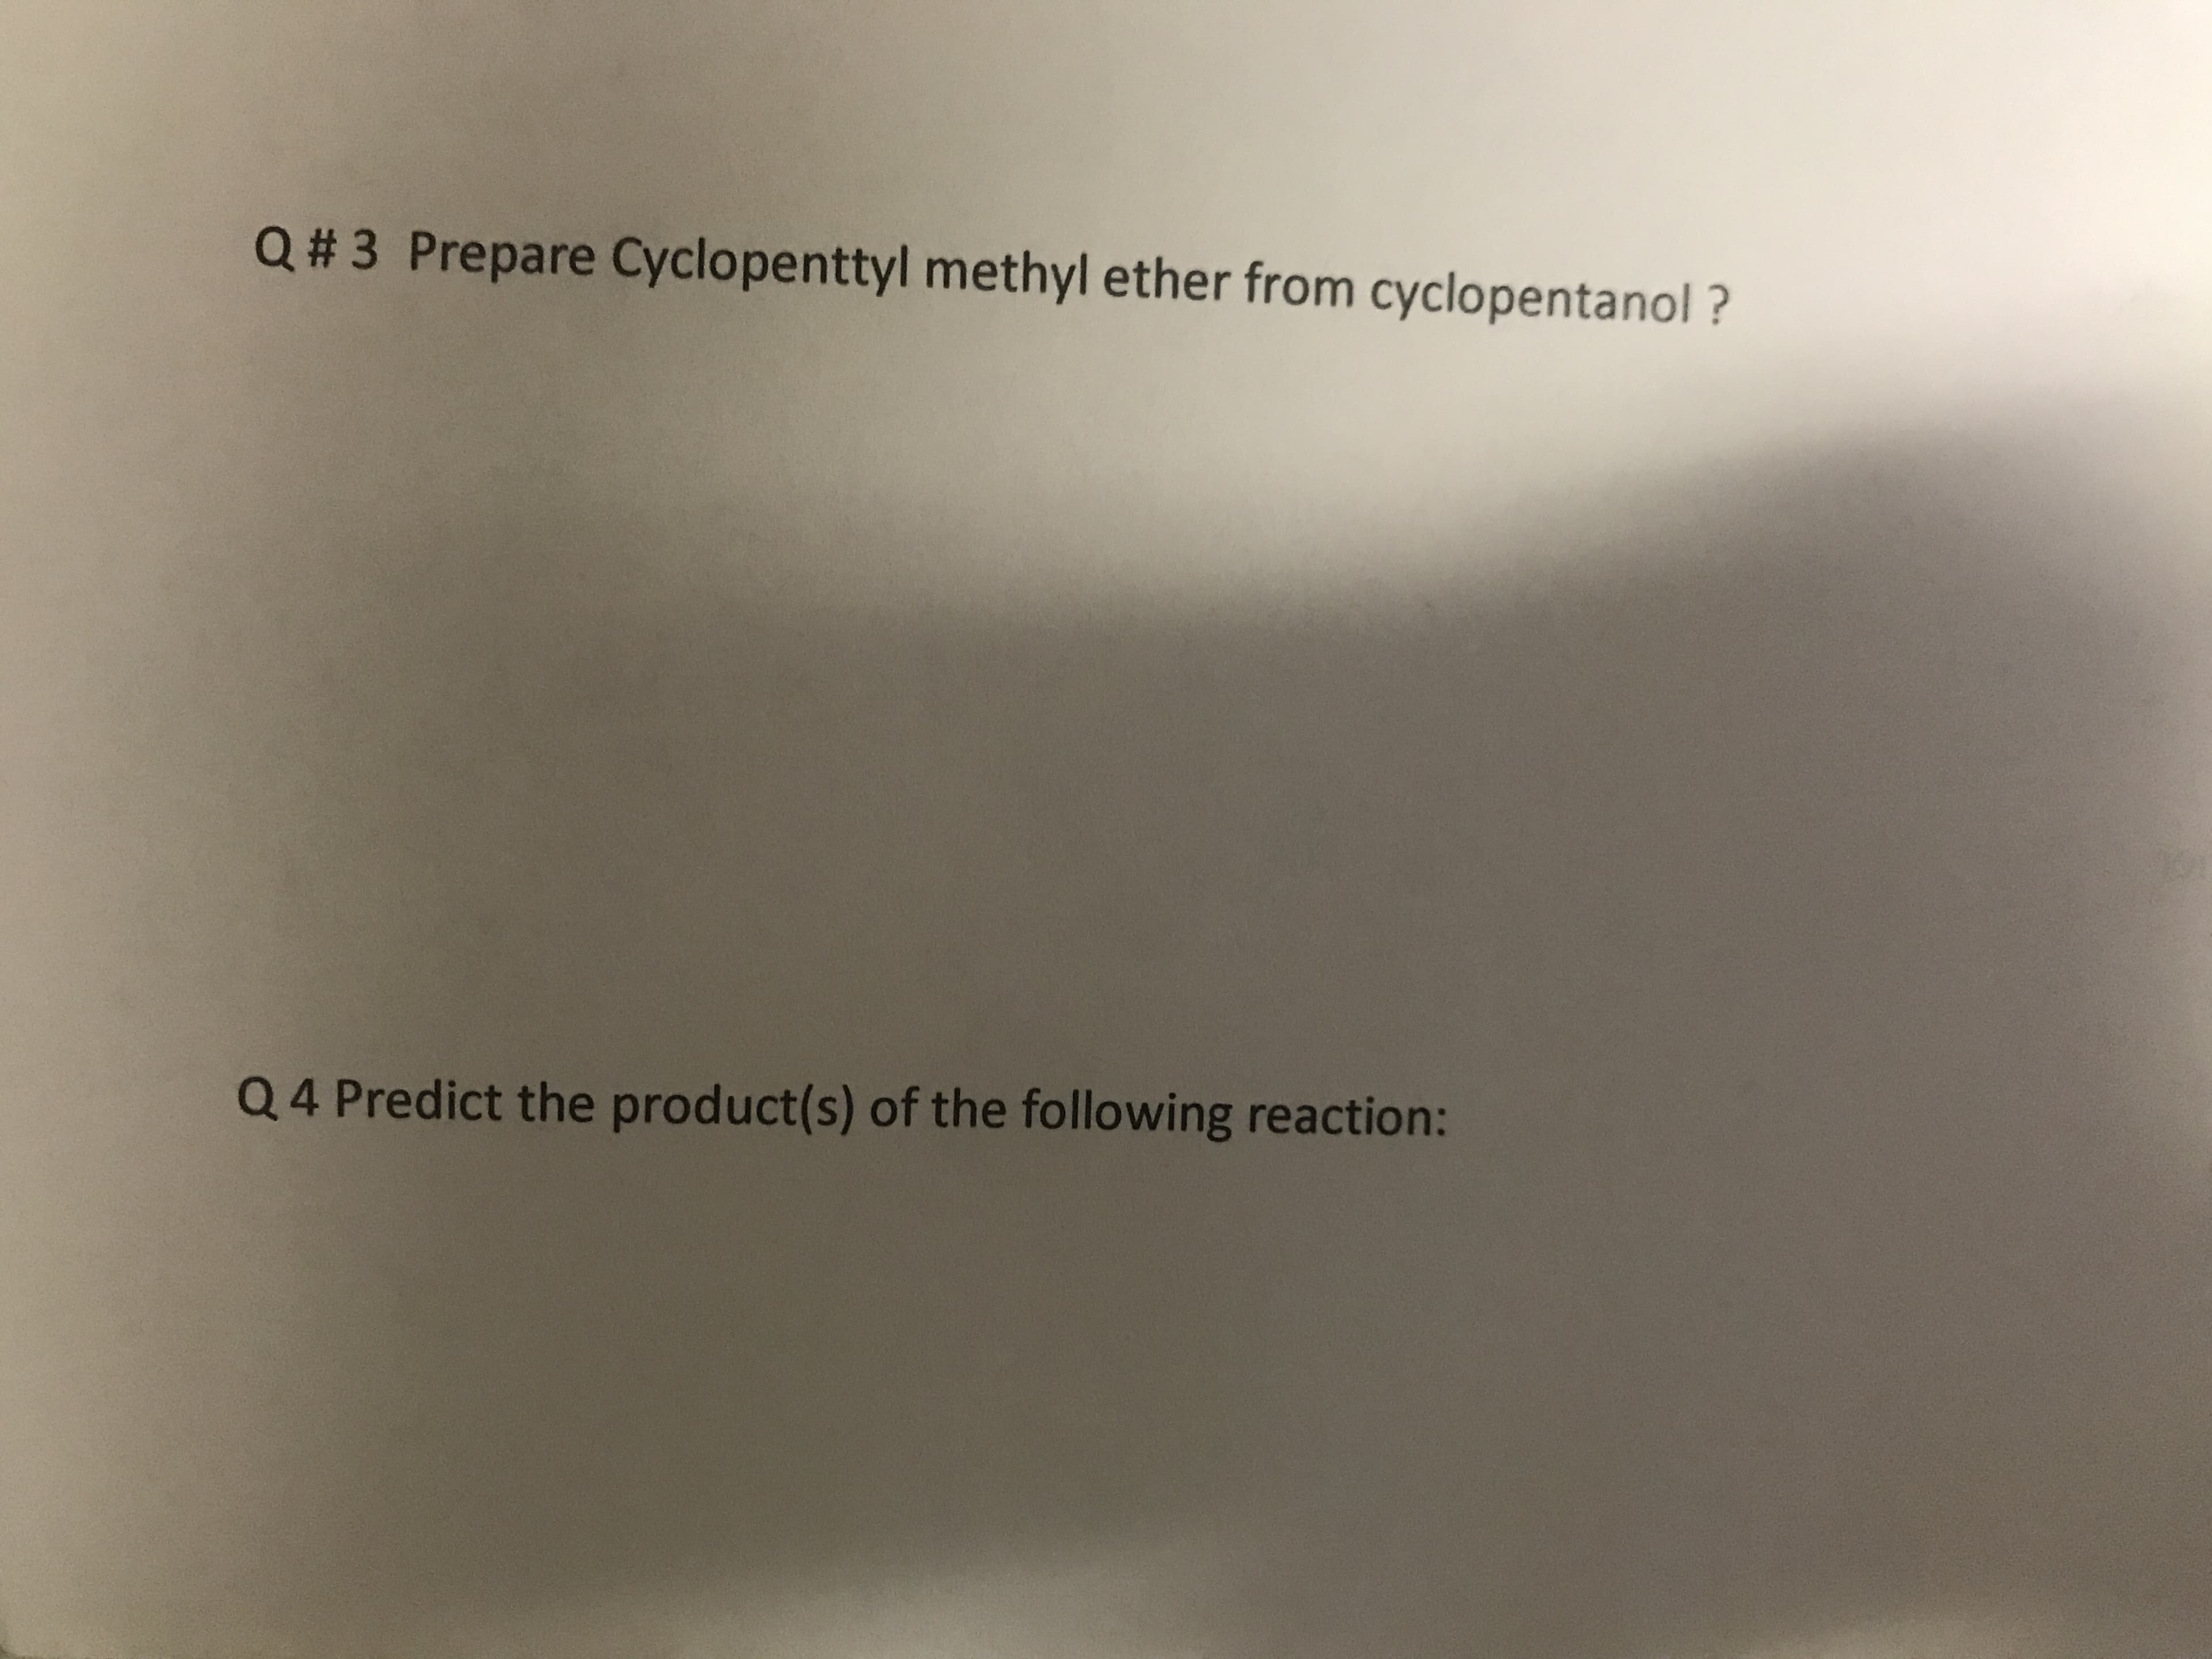 Q#3 Prepare Cyclopenttyl methyl ether from cyclopentanol?
Q4 Predict the product(s) of the following reaction:
